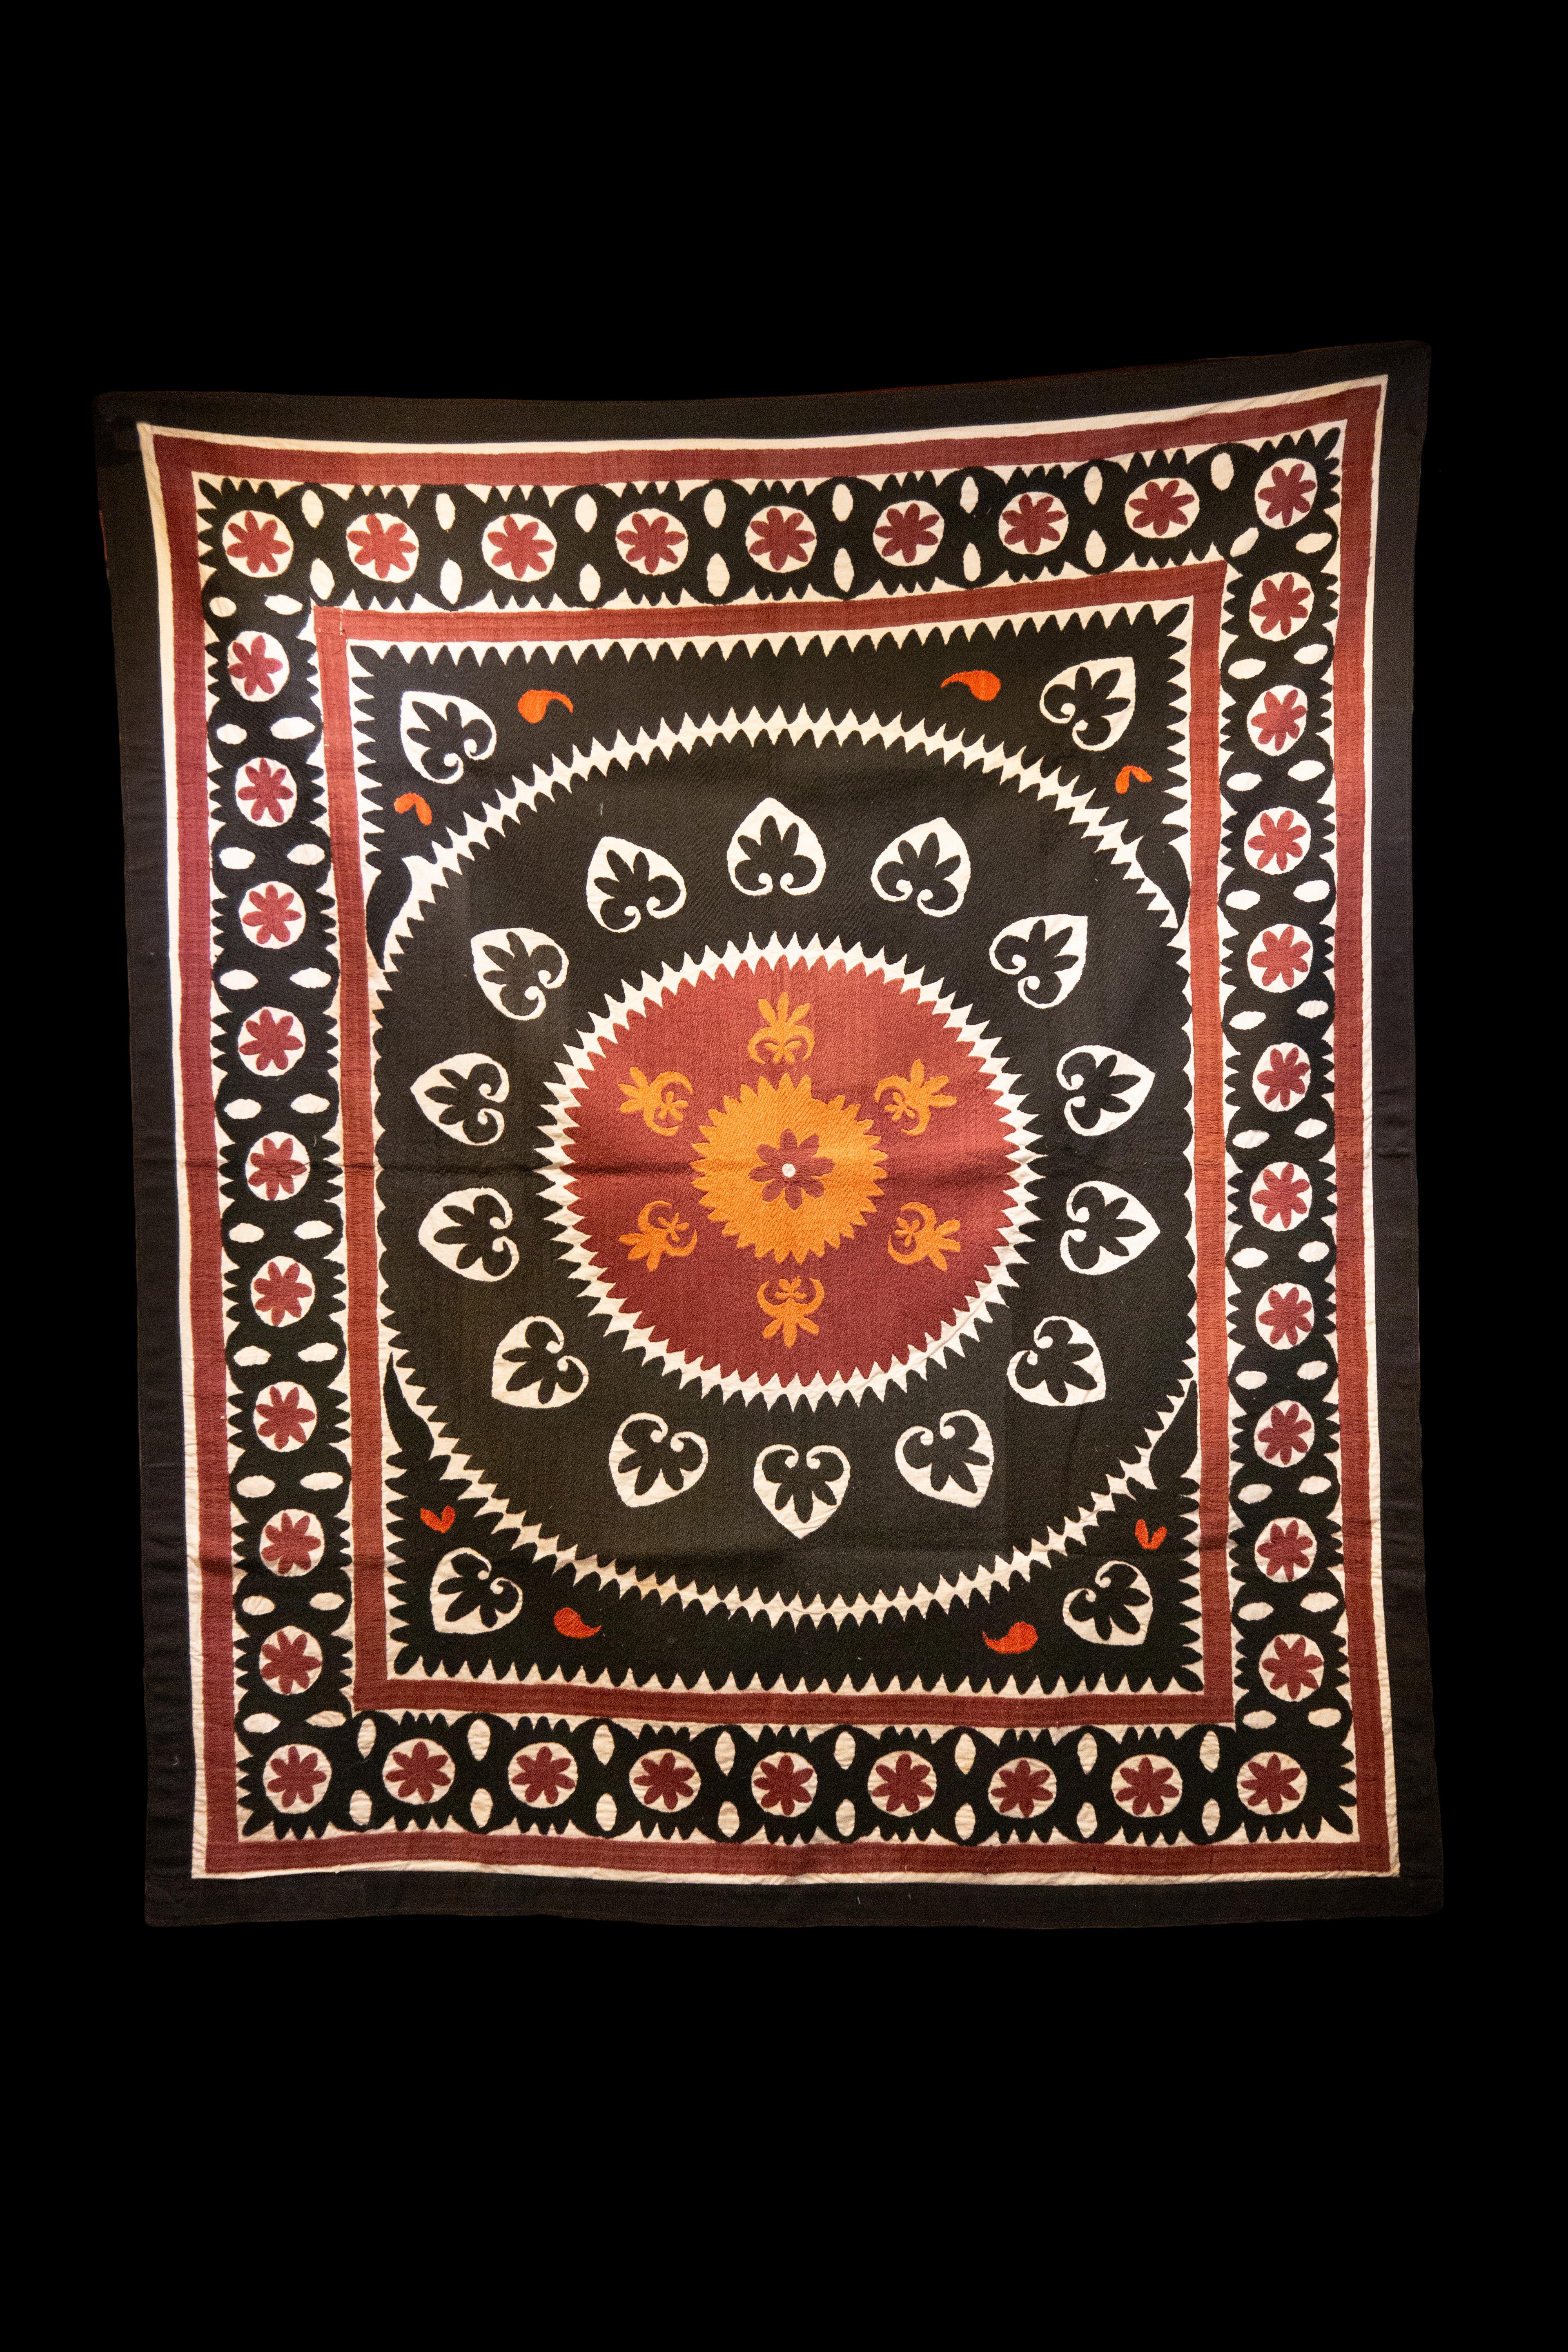 Handmade Vintage cotton suzani, charcoal, orange, and red geometric designs.

Measures: 60.5